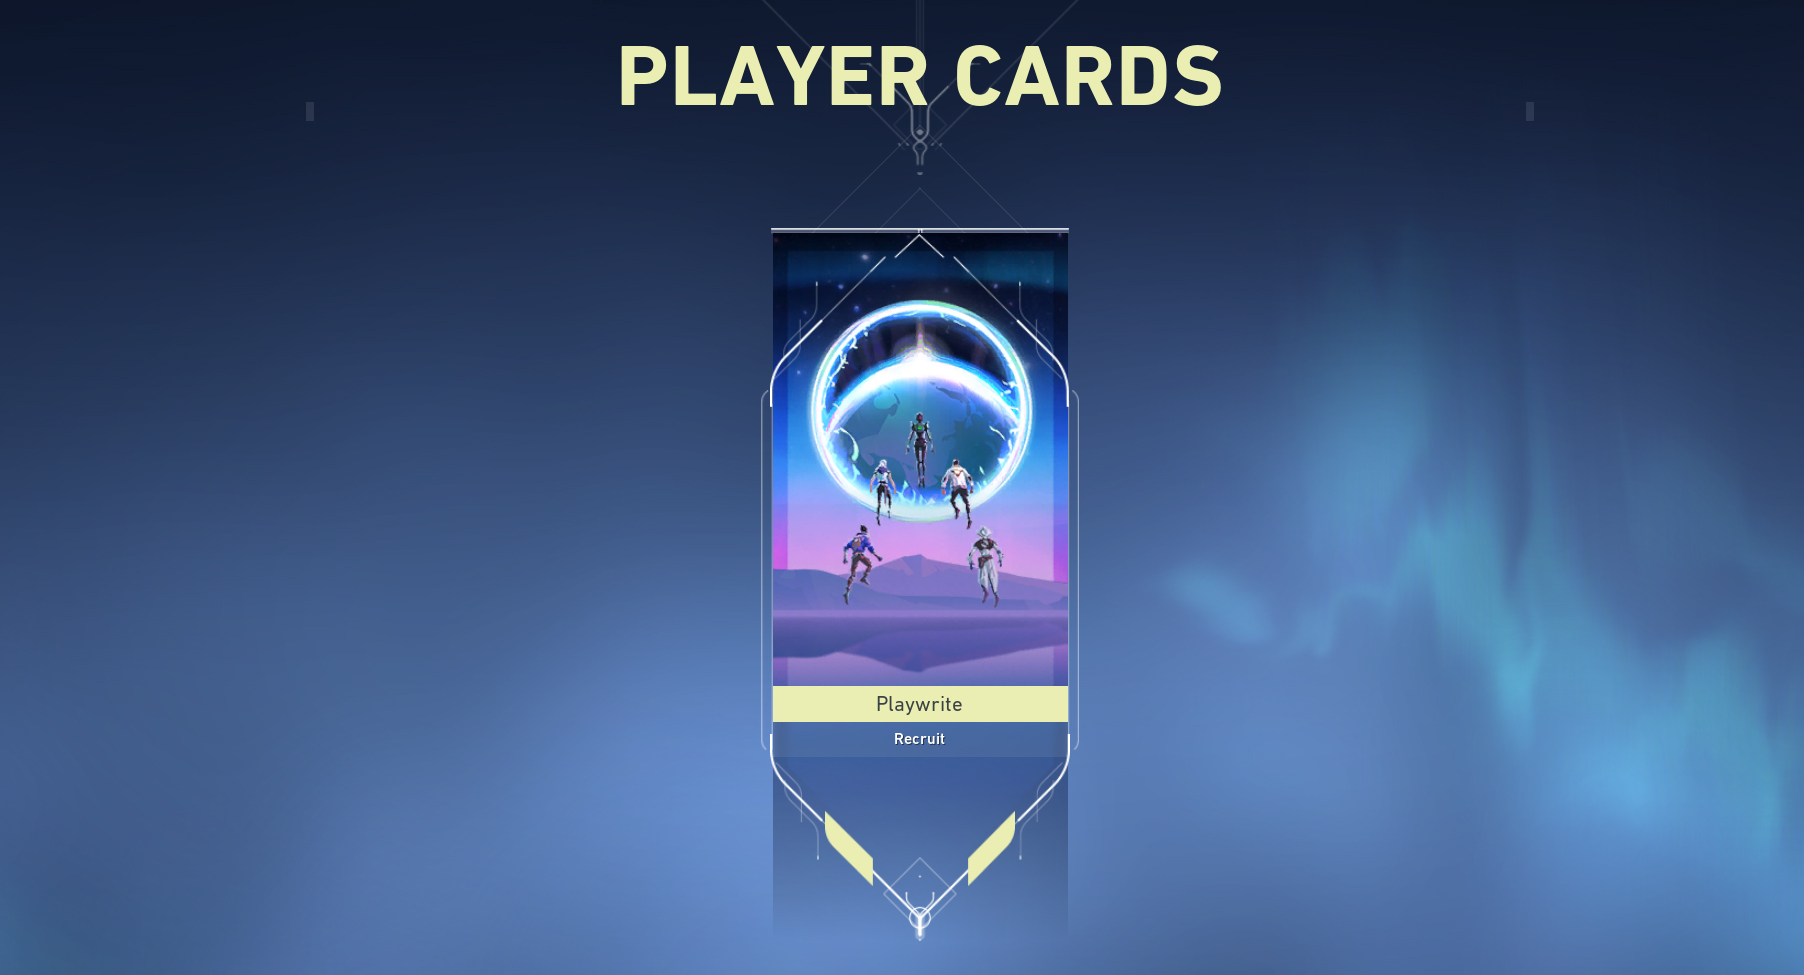 Don't miss the Year 1 Episode 2 Player Card! Collect the exclusive